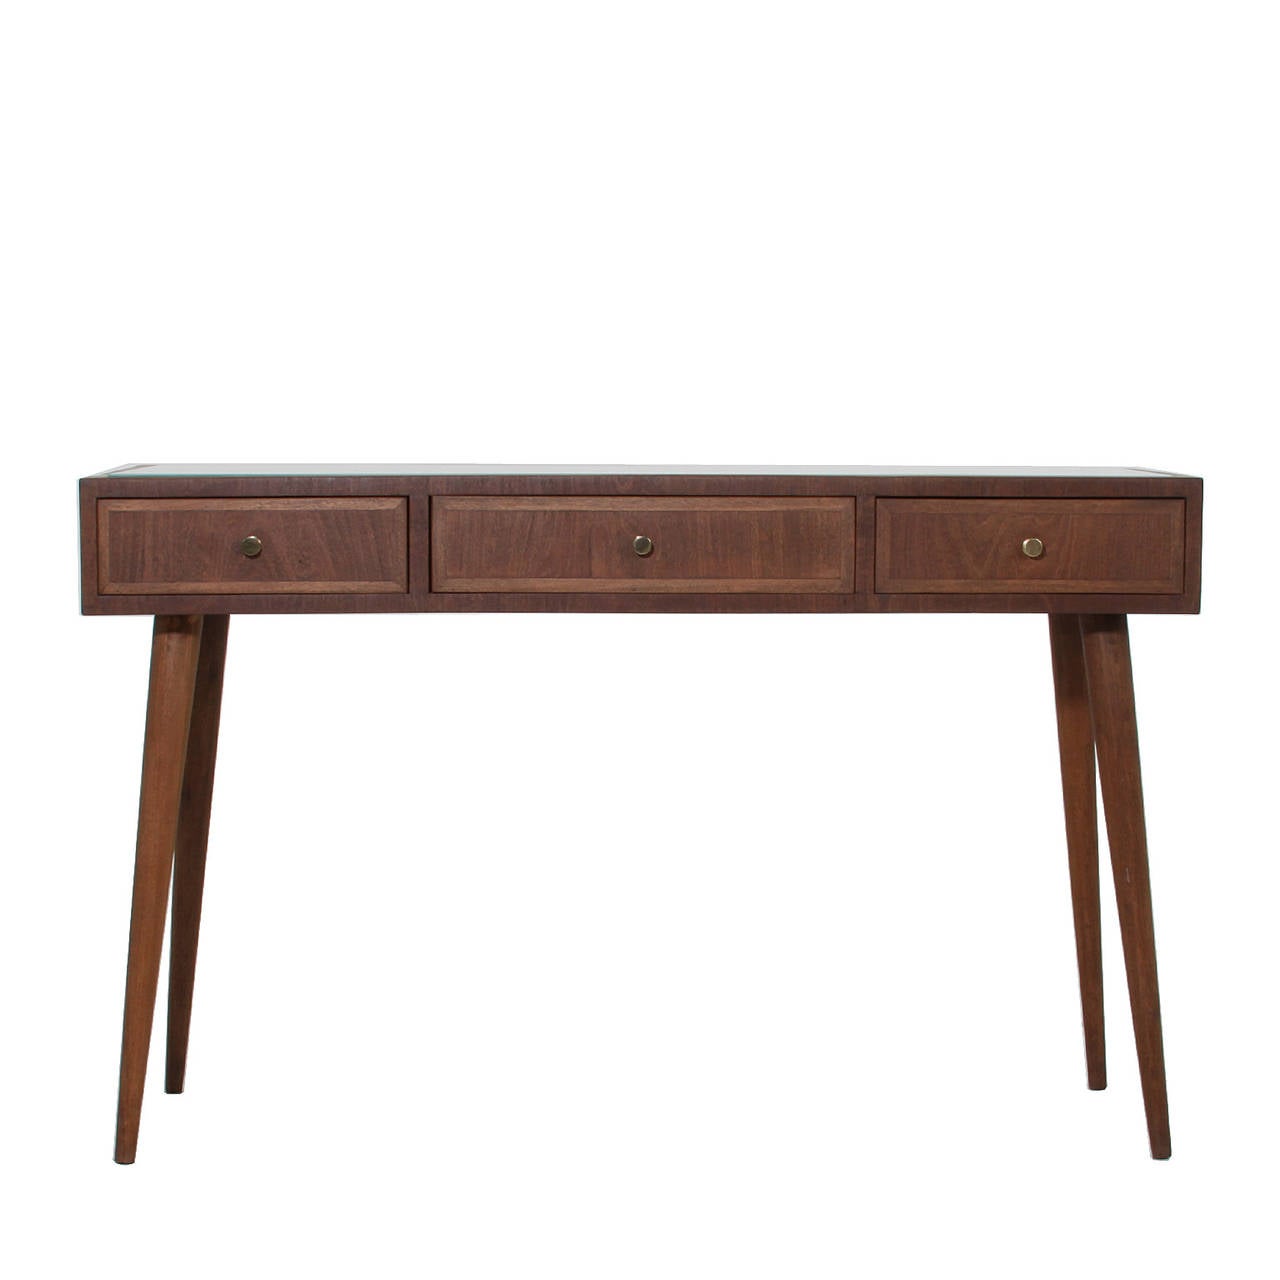 A lovely little desk or console table by Guiseppe Scapinelli for Moveis Tepperman designed with Brazilian Freijo wood with splayed round legs, an inset white glass top, and polished brass drawer pulls.

Many pieces are stored in our warehouse, so